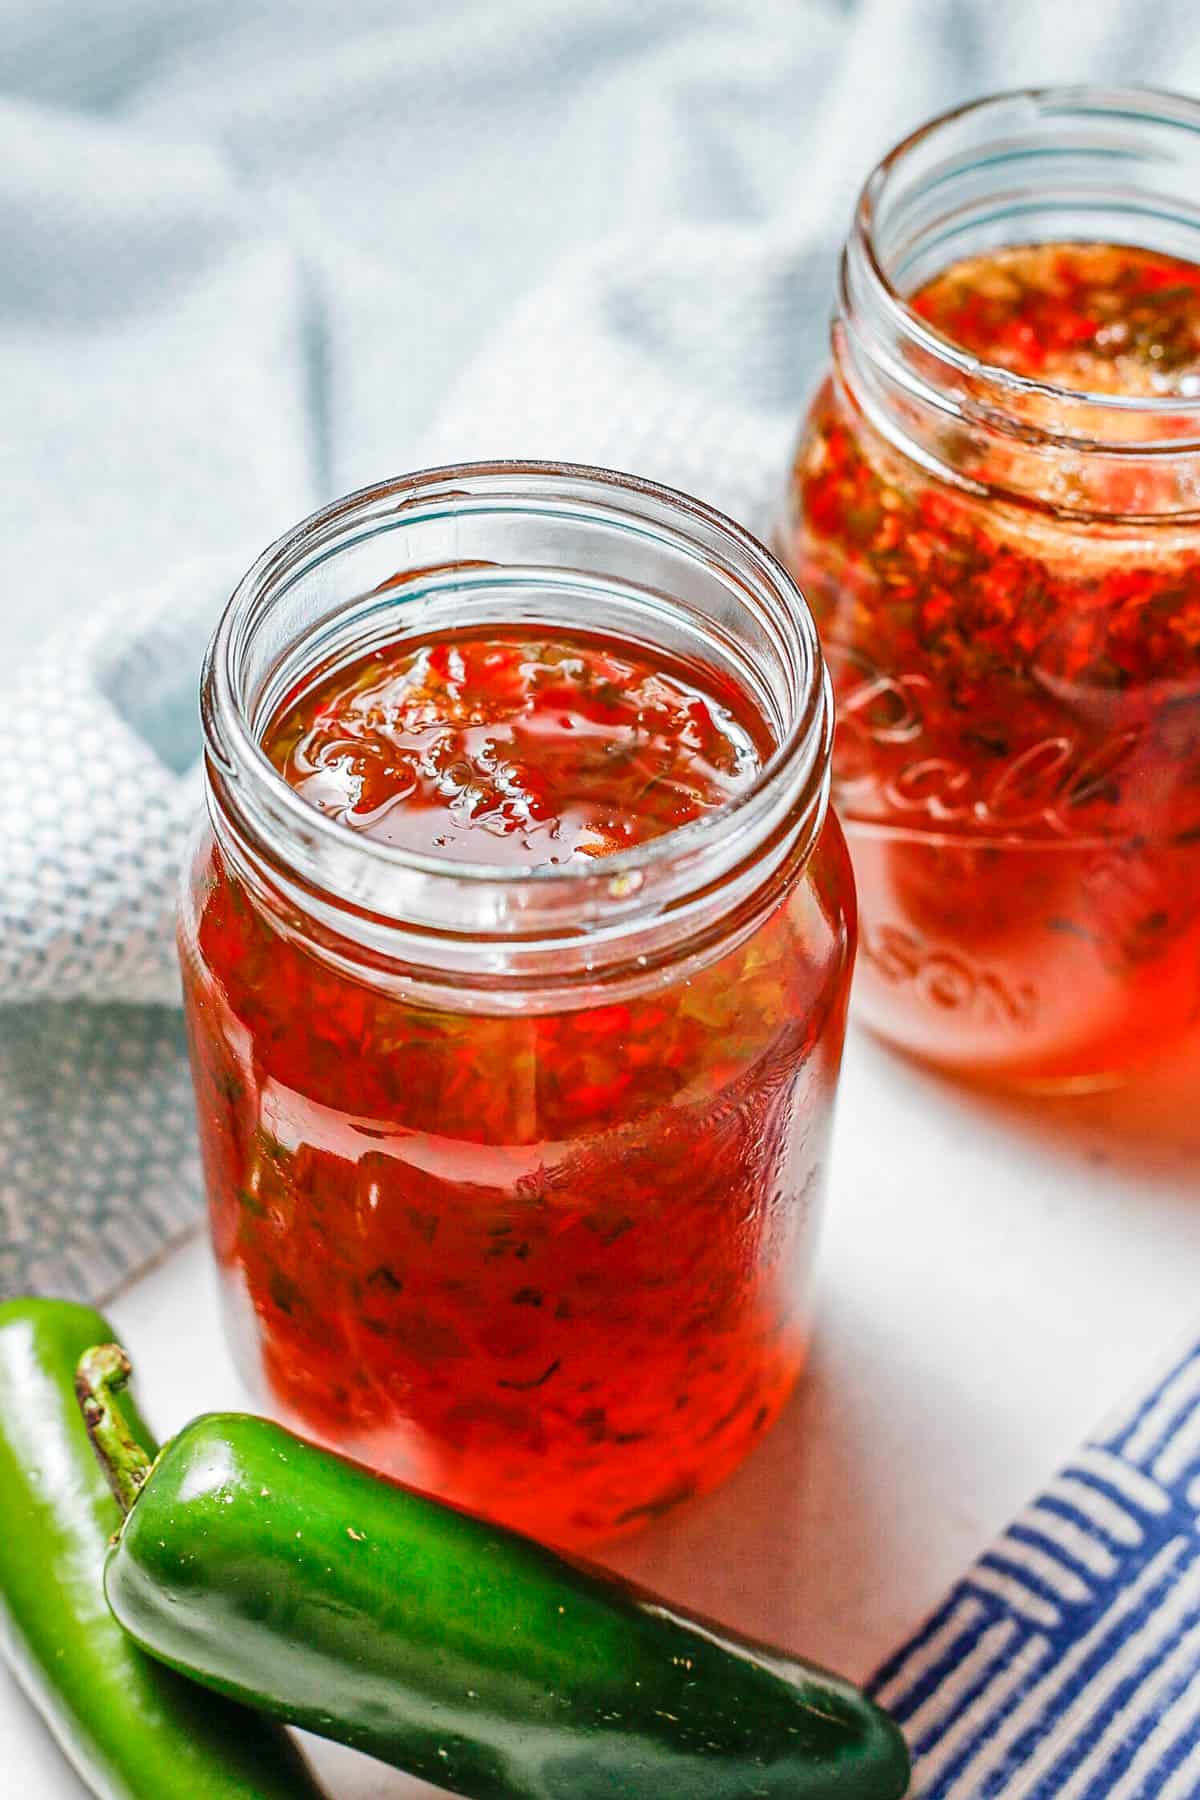 An open jar of pepper jelly alongside a couple of jalapeno peppers.